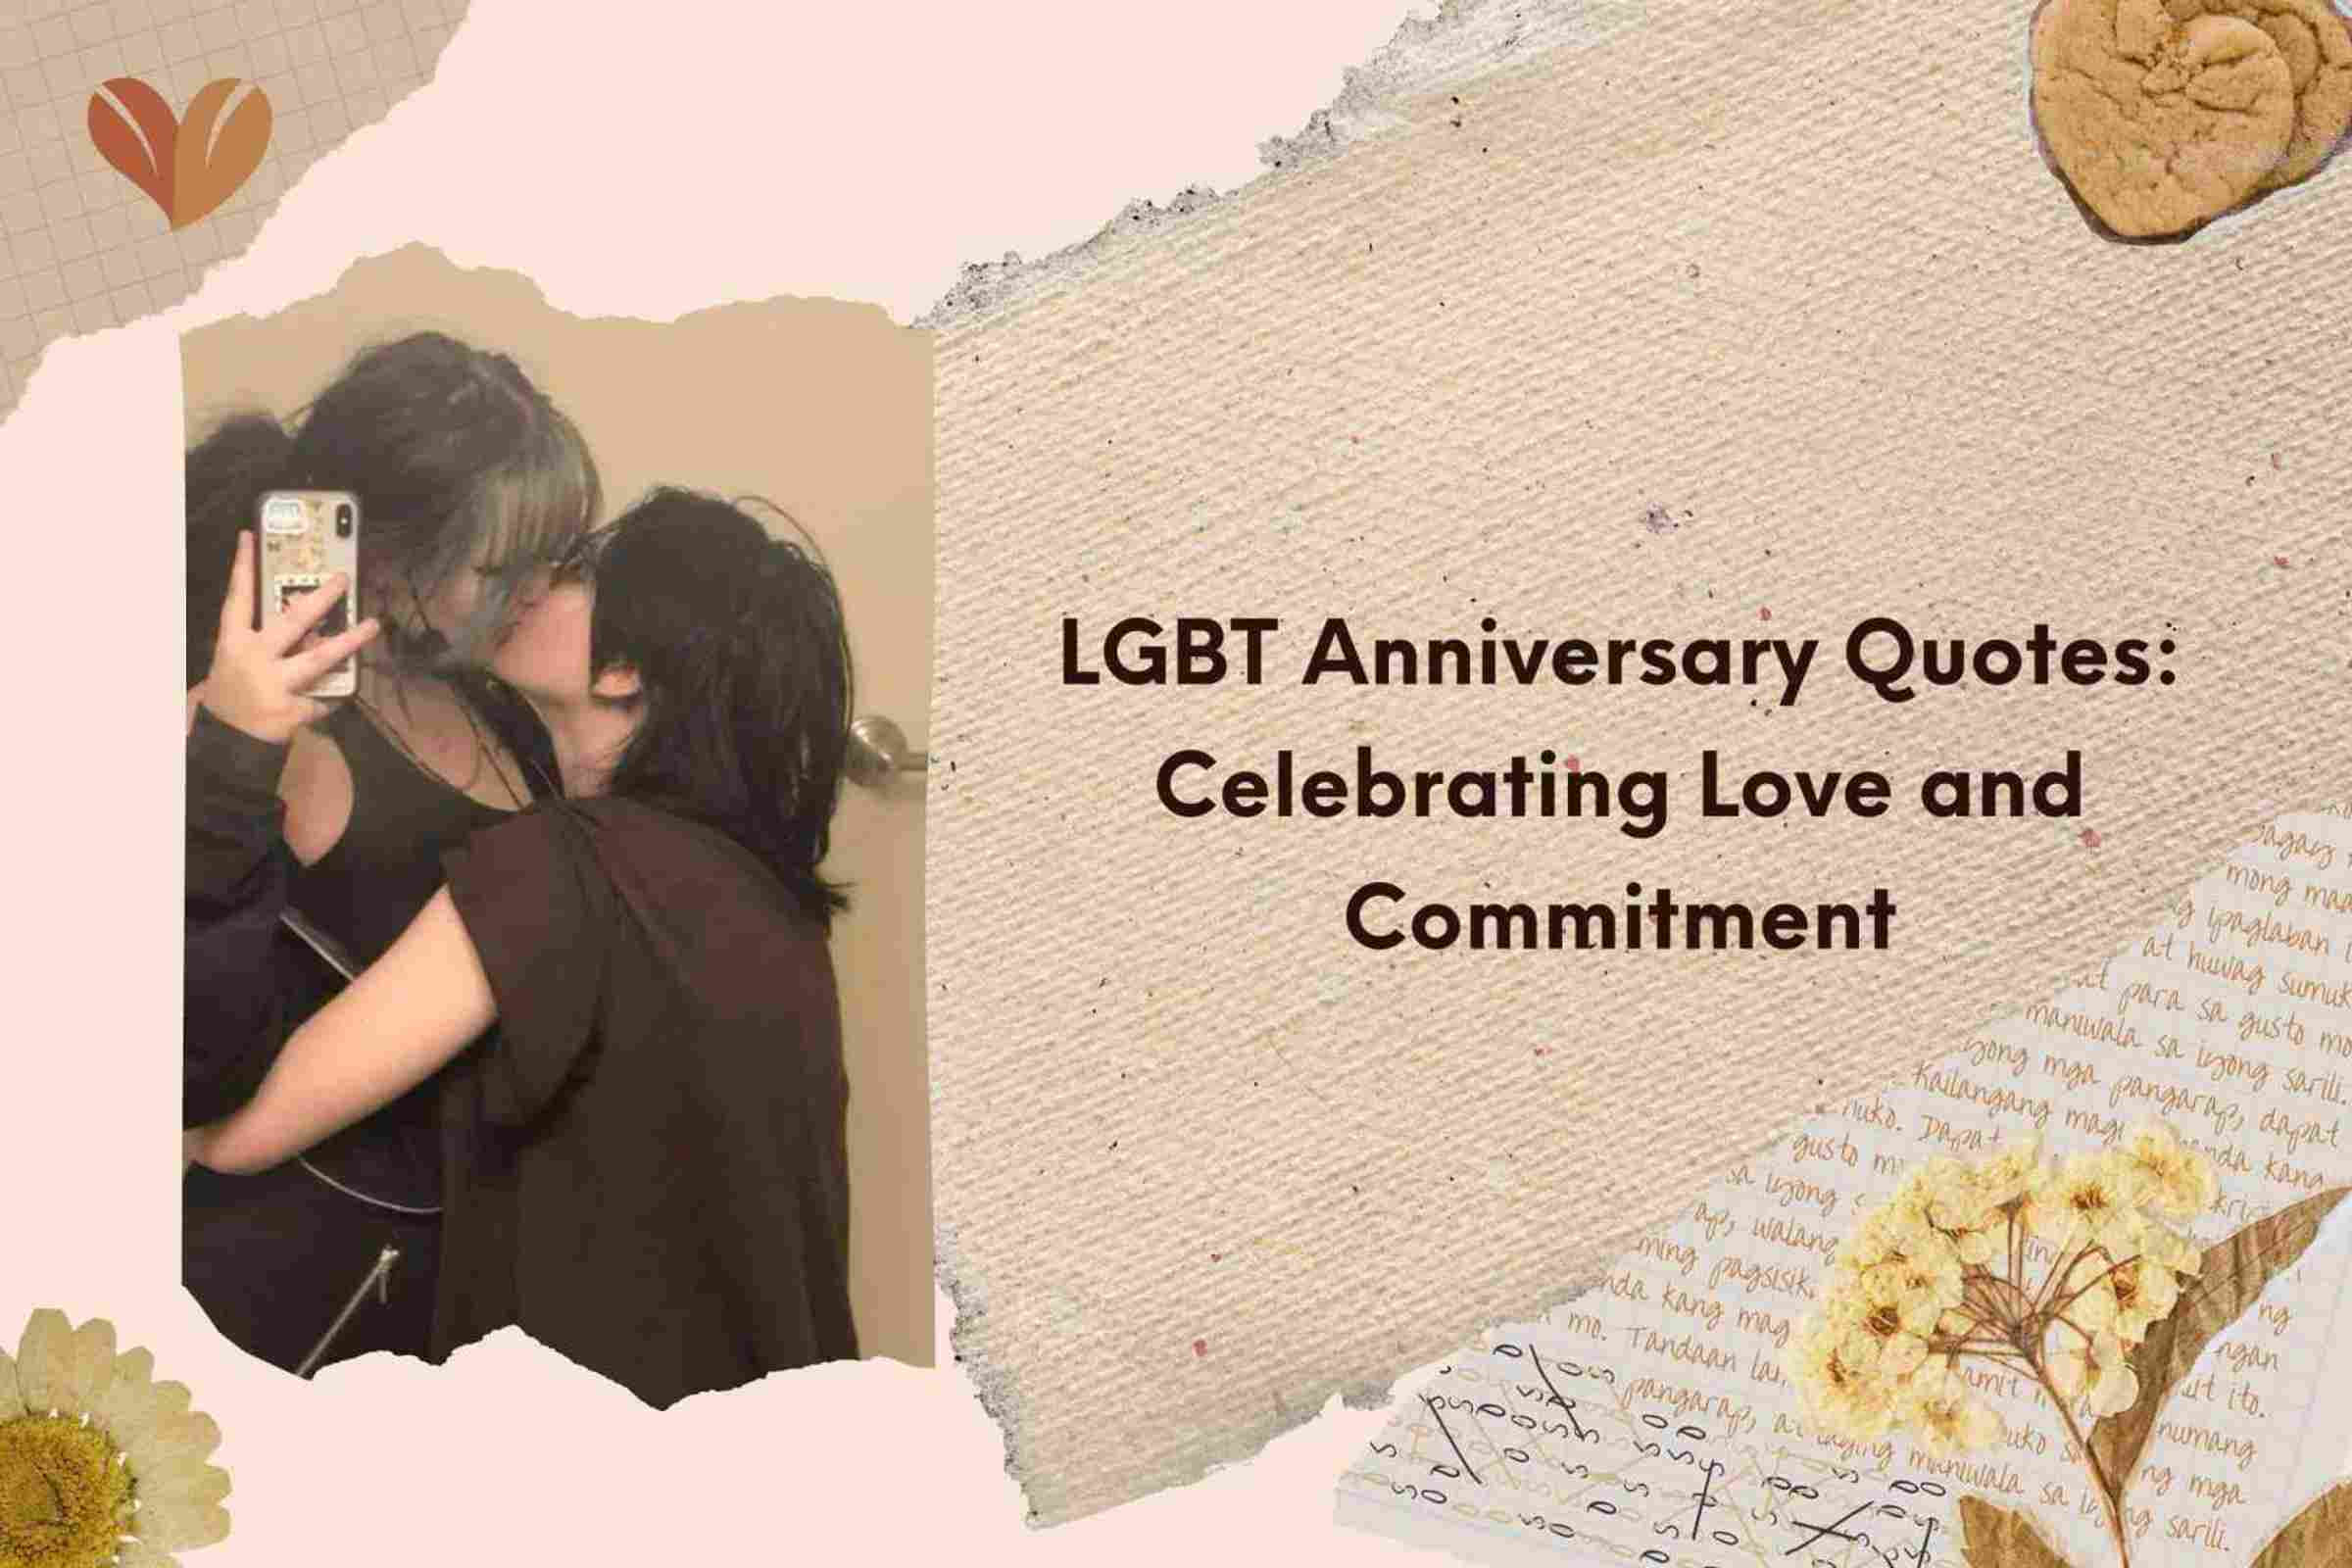 LGBT Anniversary Quotes: Celebrating Love and Commitment